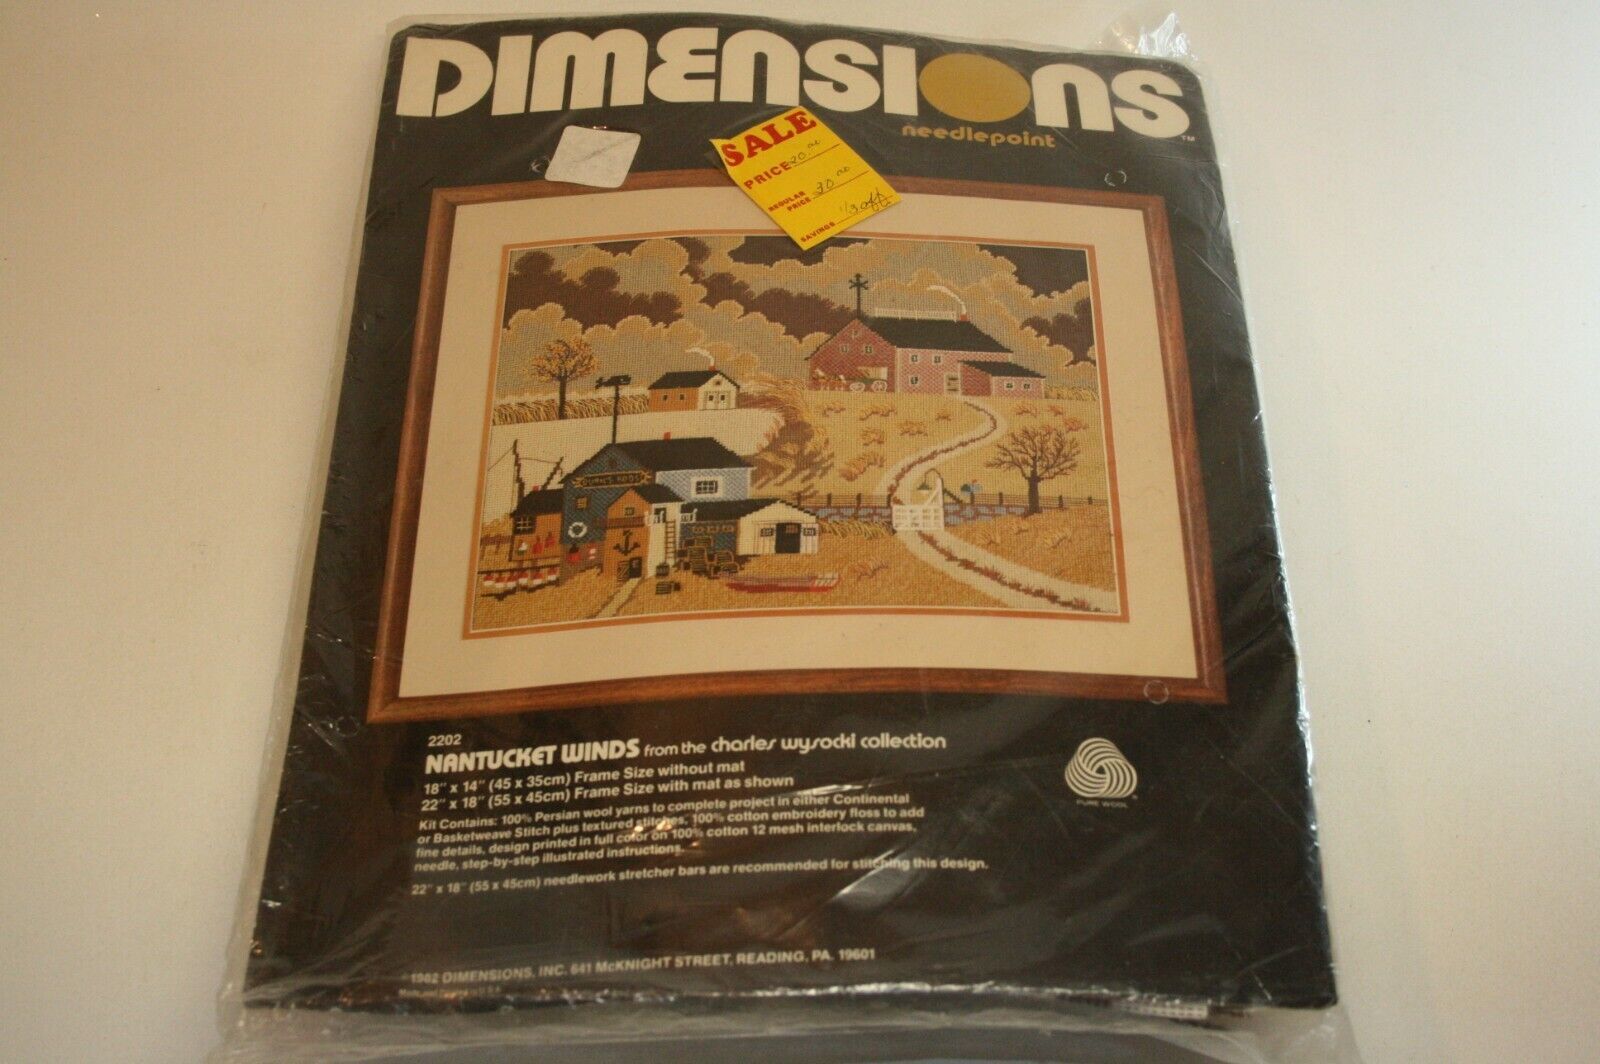 1982 Dimensions #2022 Nantucket Winds 18 x 14 Needle Point NOS - $34.64